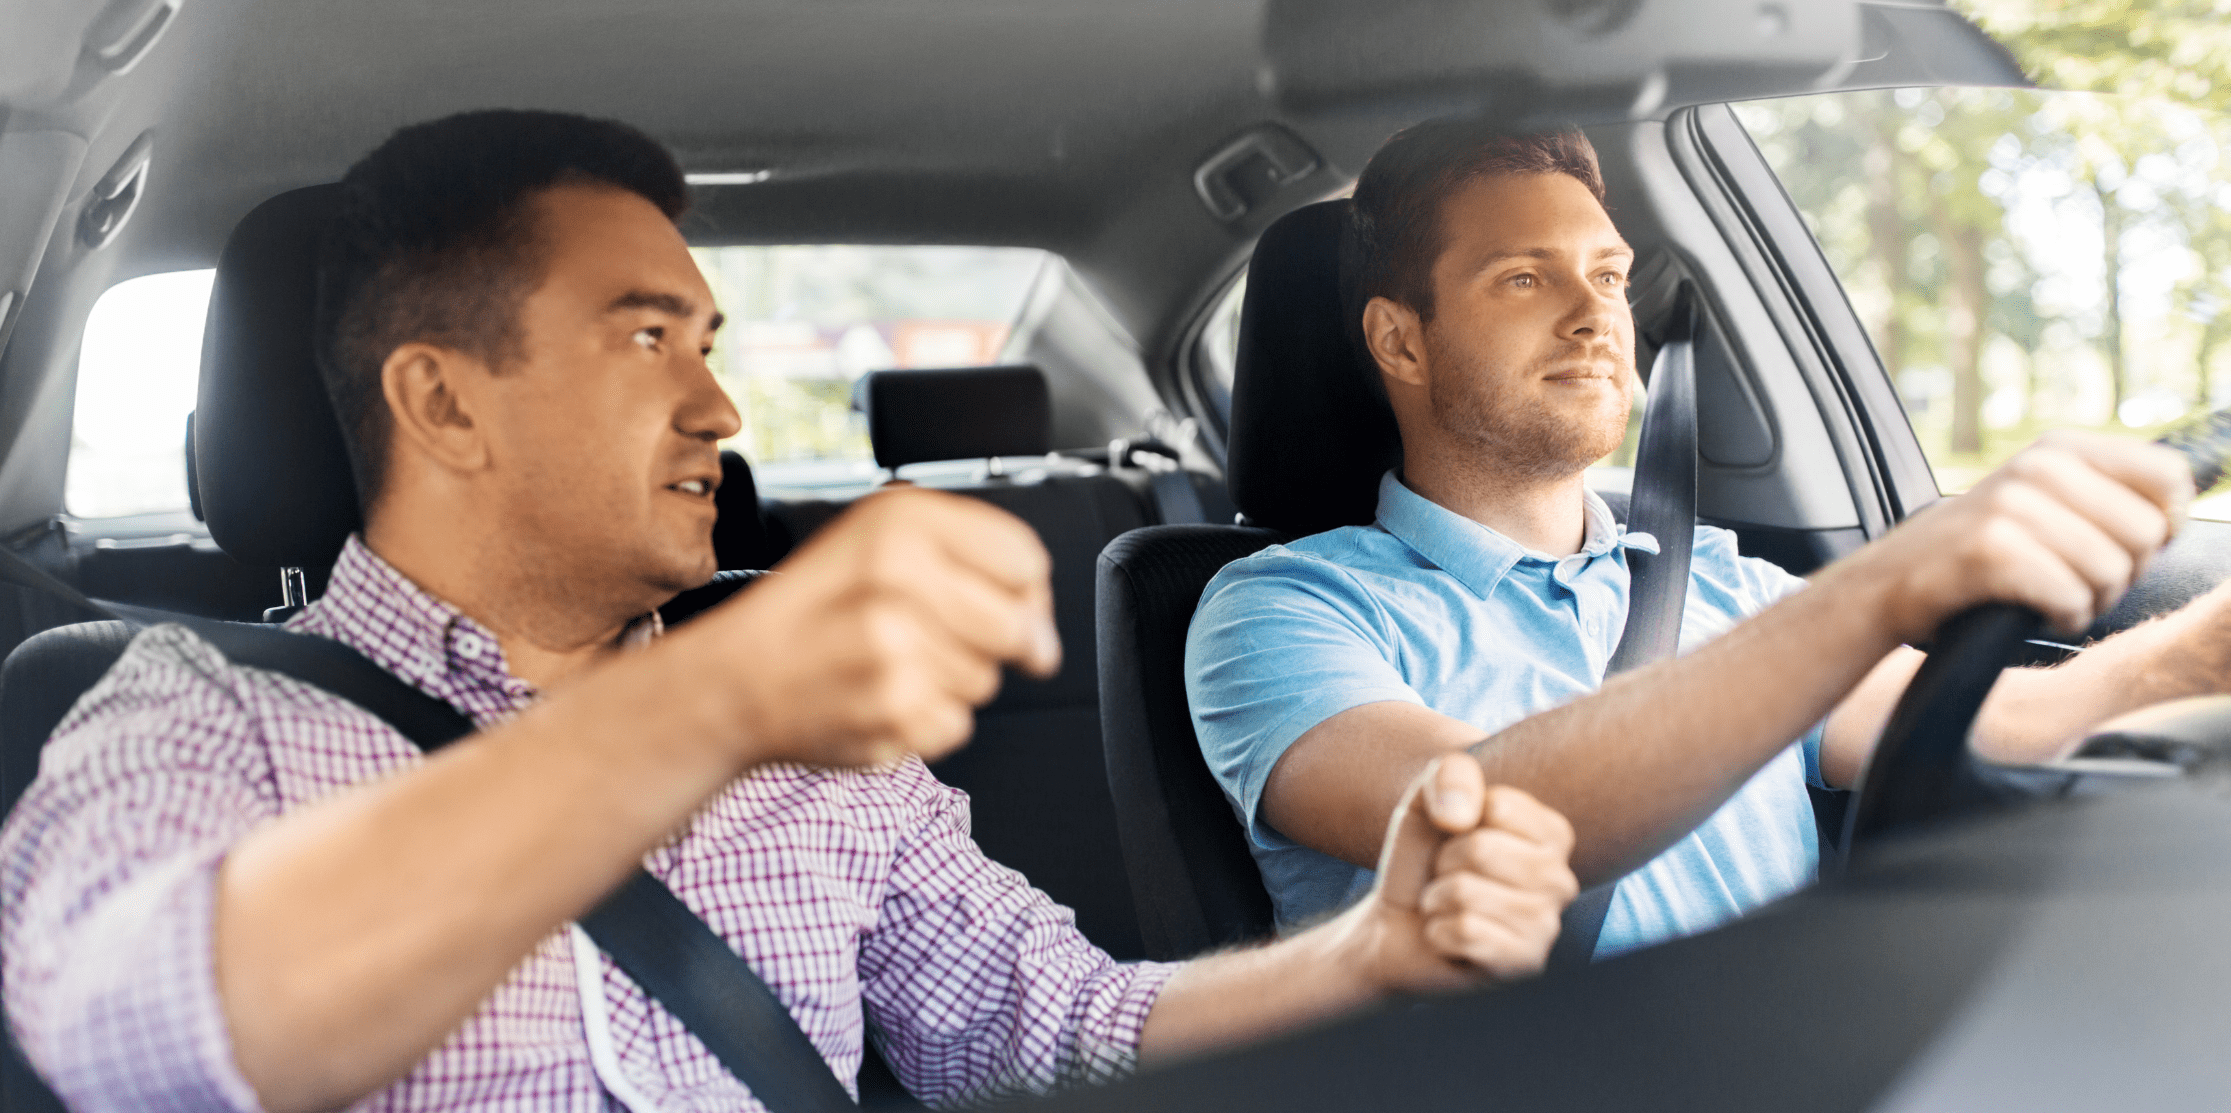 Defensive Driving The Key to Avoiding Accidents and Staying Safe